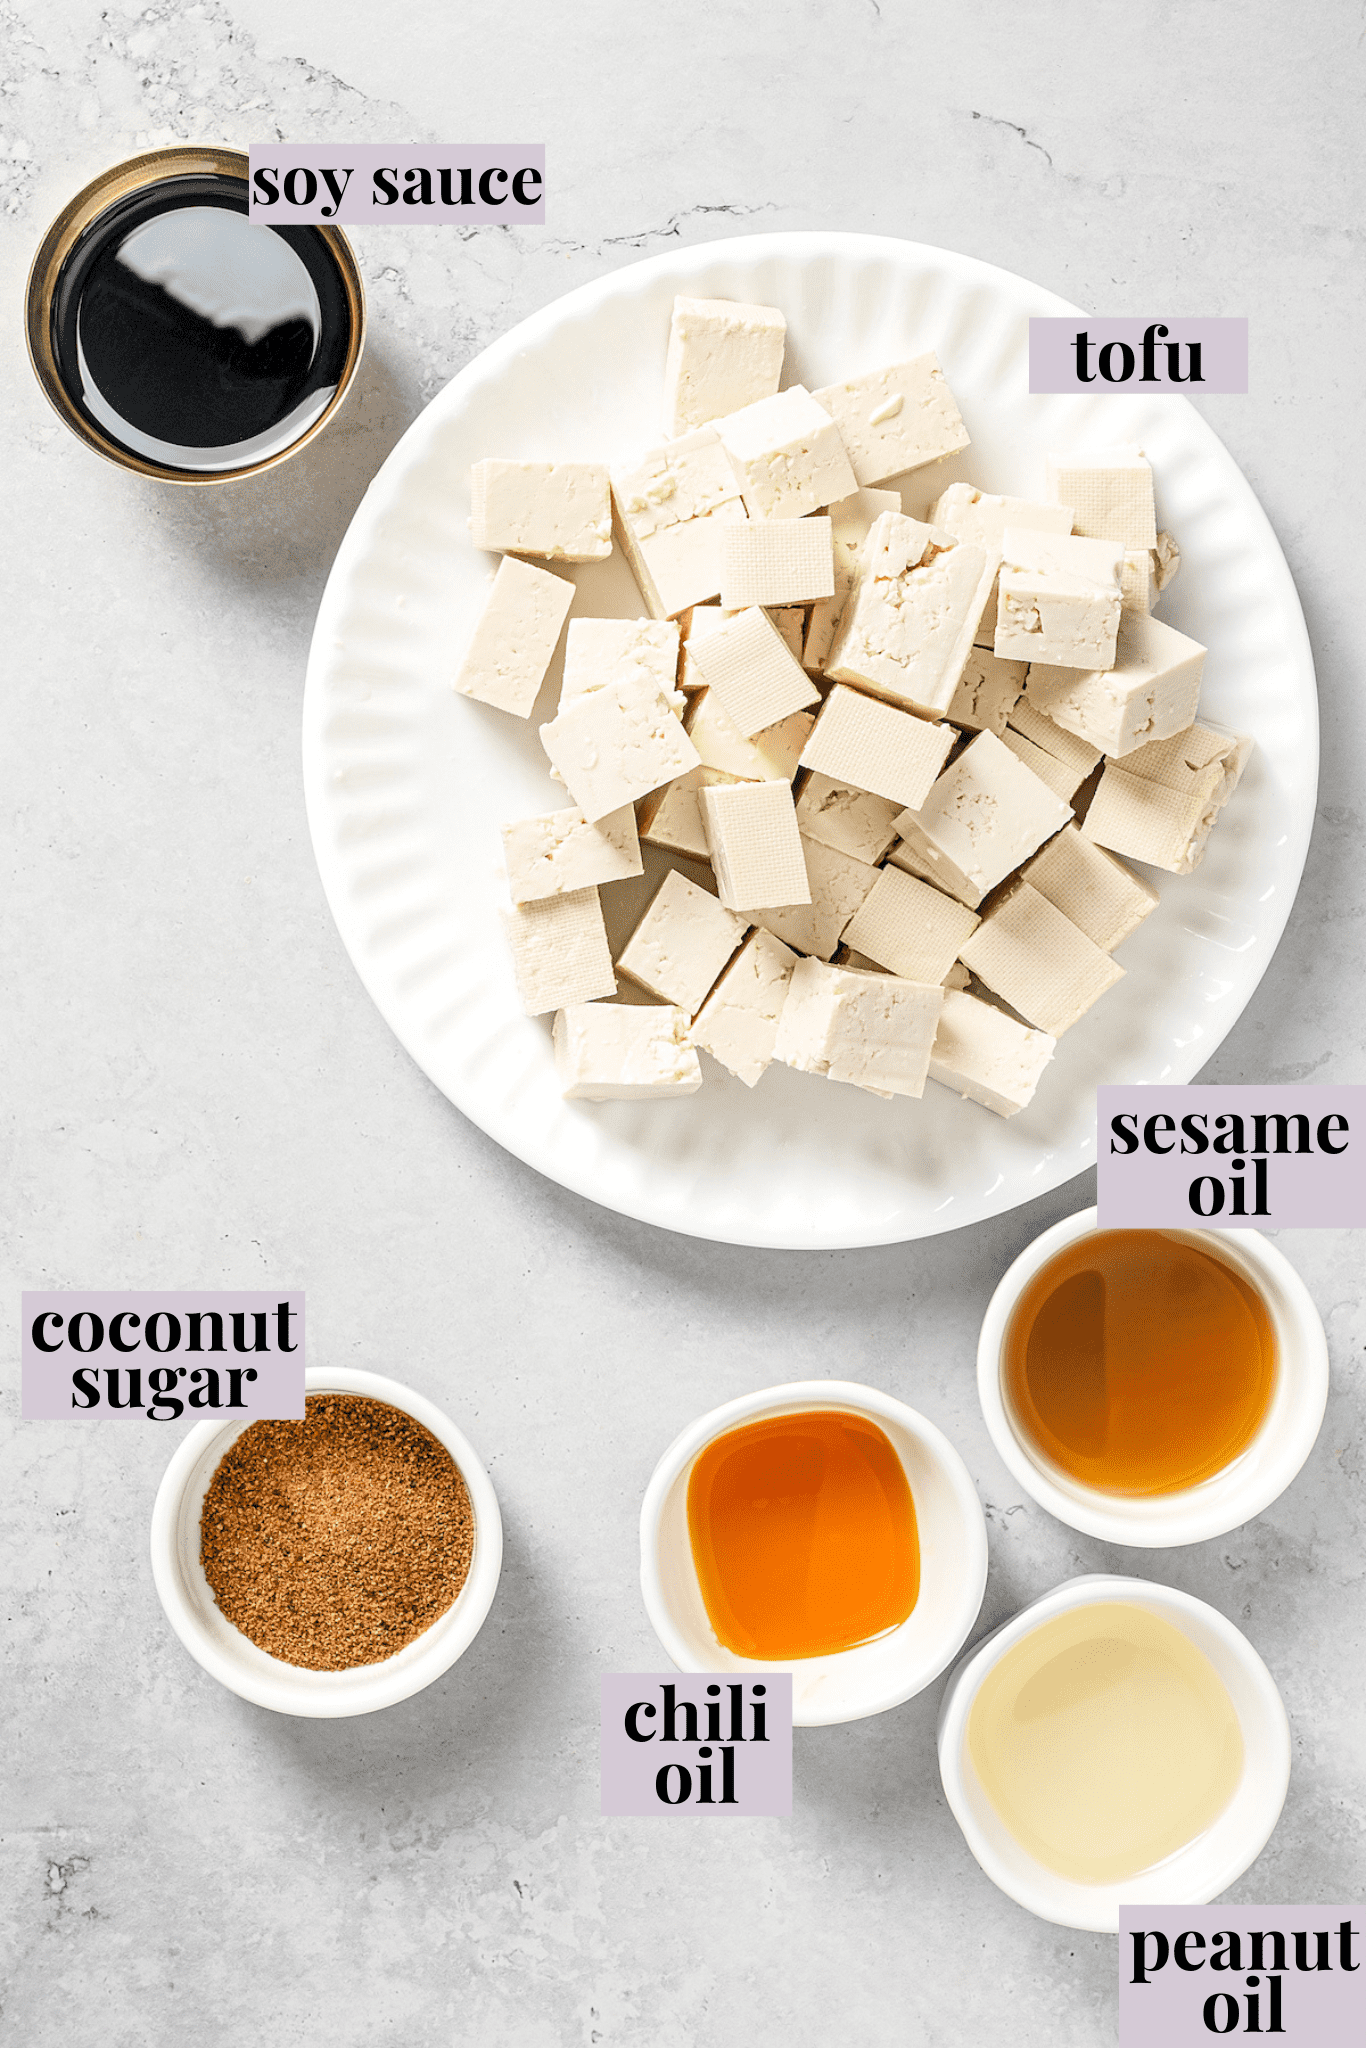 Overhead view of ingredients for pan-fried tofu with labels